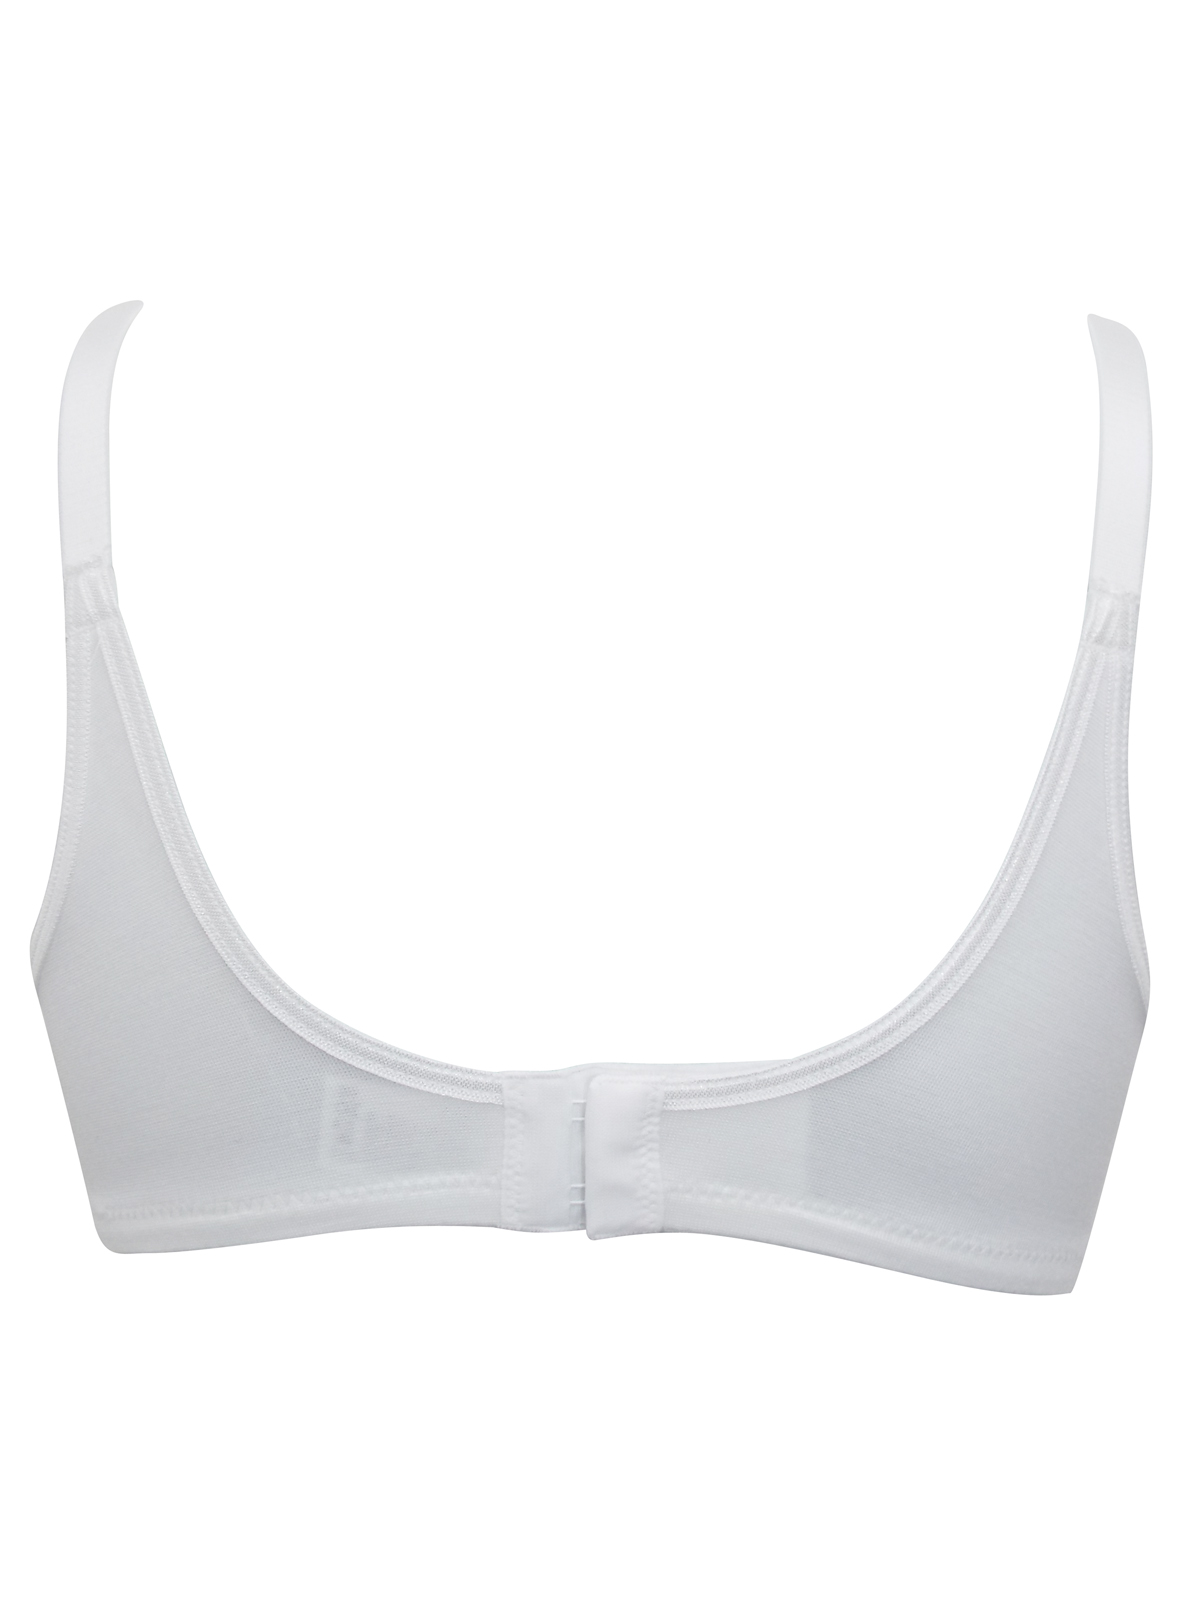 Details about   M&S White Bra 36B 36DD 40F Total Support Full Cup Non Padded Non Wired 8045 